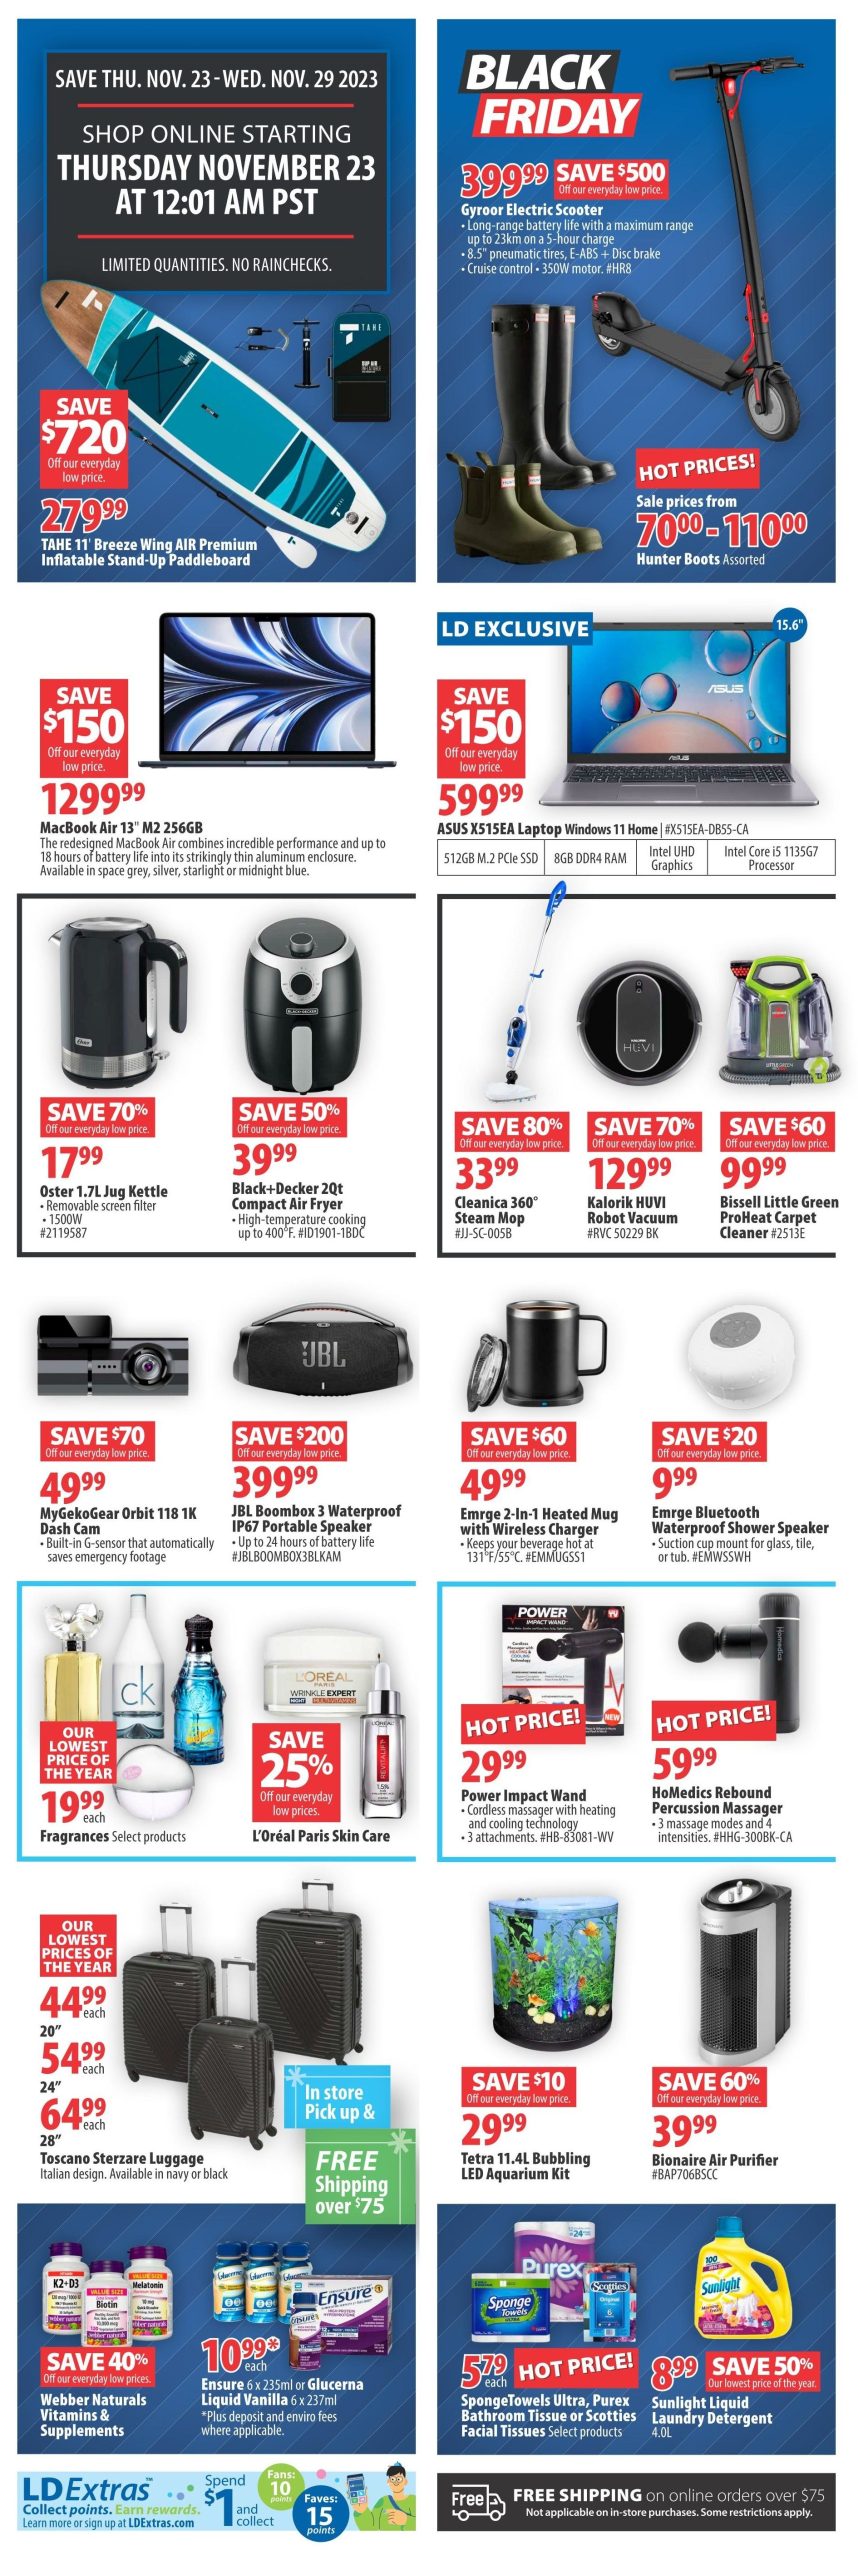 London Drugs Flyer August 4 to August 10, 2023 1 – london drugs flyer black friday 1 scaled